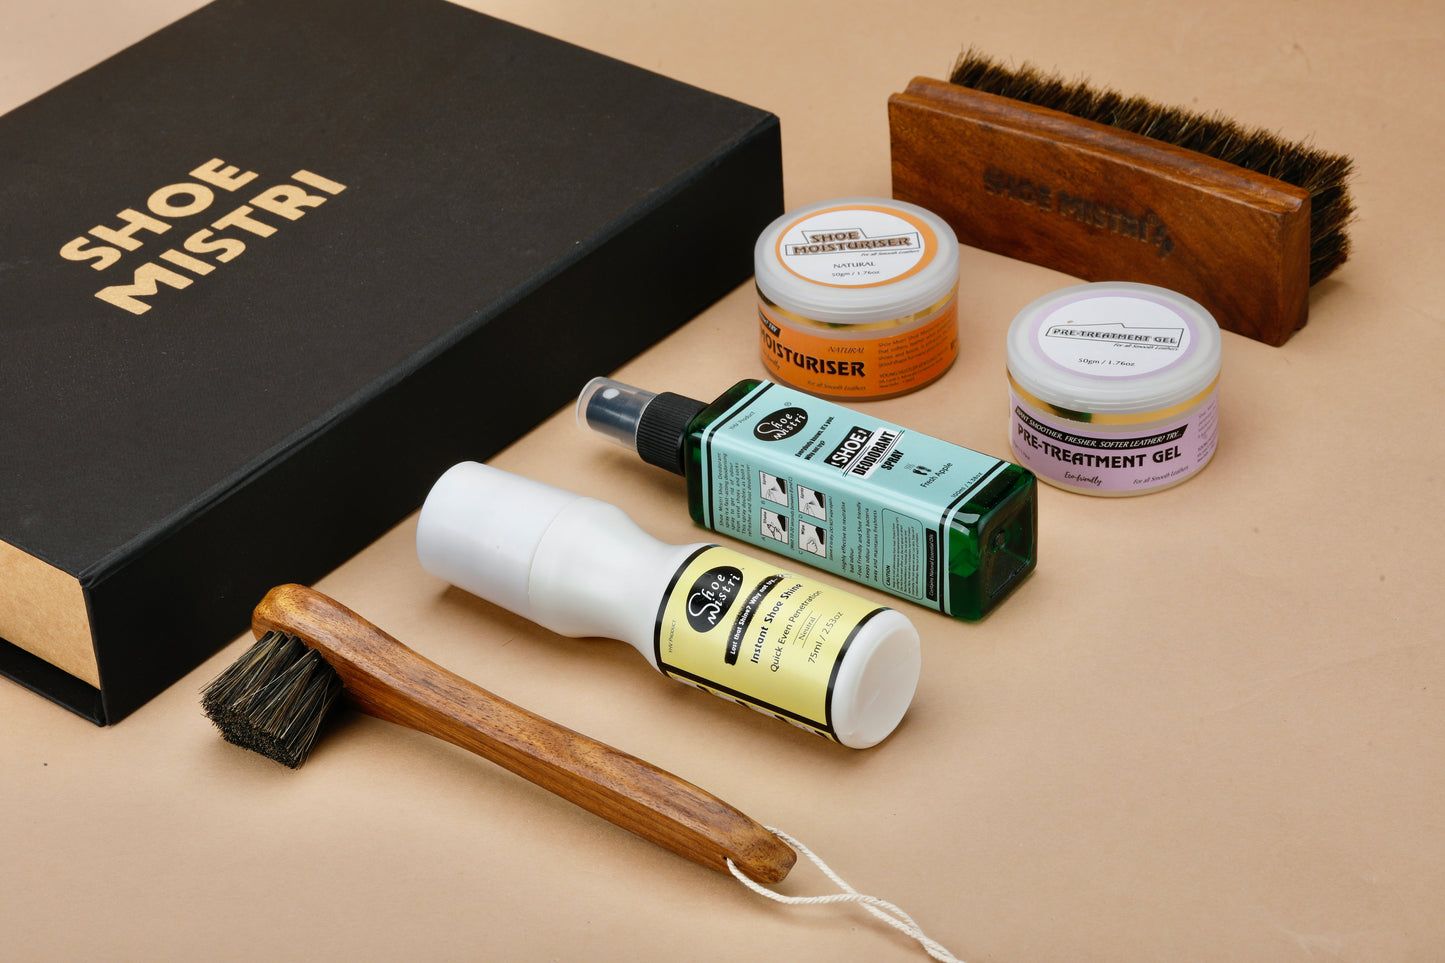 Shoe Mistri Leather Care Kit Drawer | Pack Of Instant Shoe Shiner, Moisturiser, Pre-treatment Gel, Deodorant, Horse Hair Curved Brush & Soft Applicator Brush | Best for Cleaning, Shining & Buffing Leather Boots & Other Leather Materials